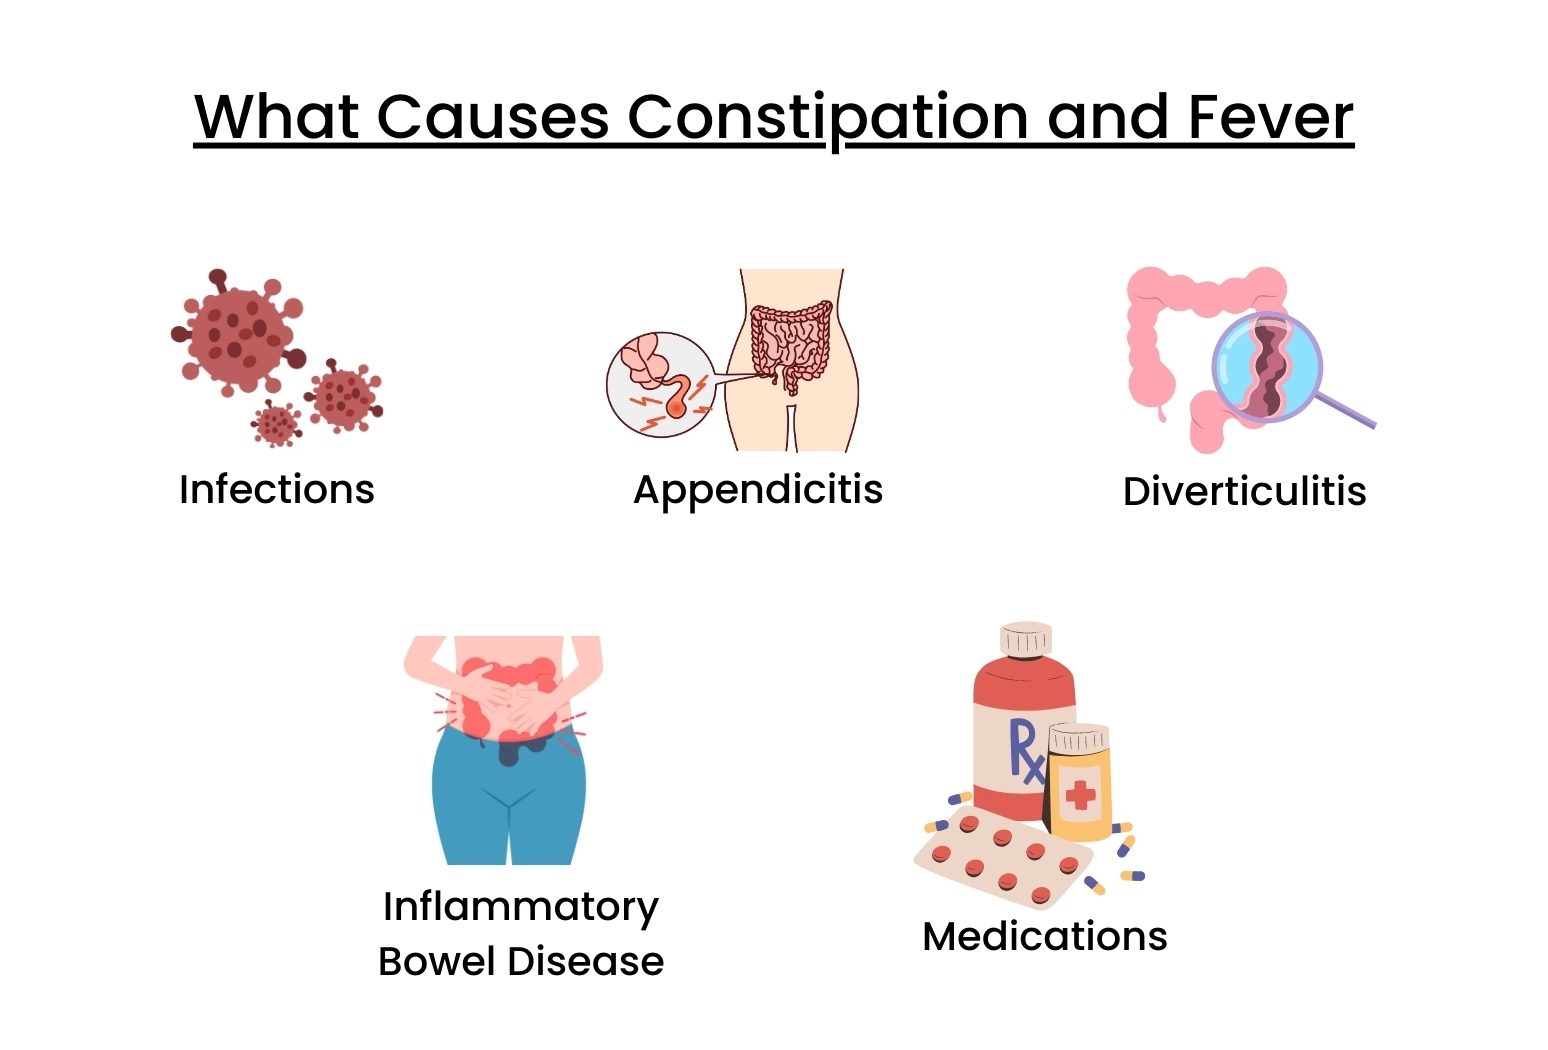 What Causes Constipation and Fever